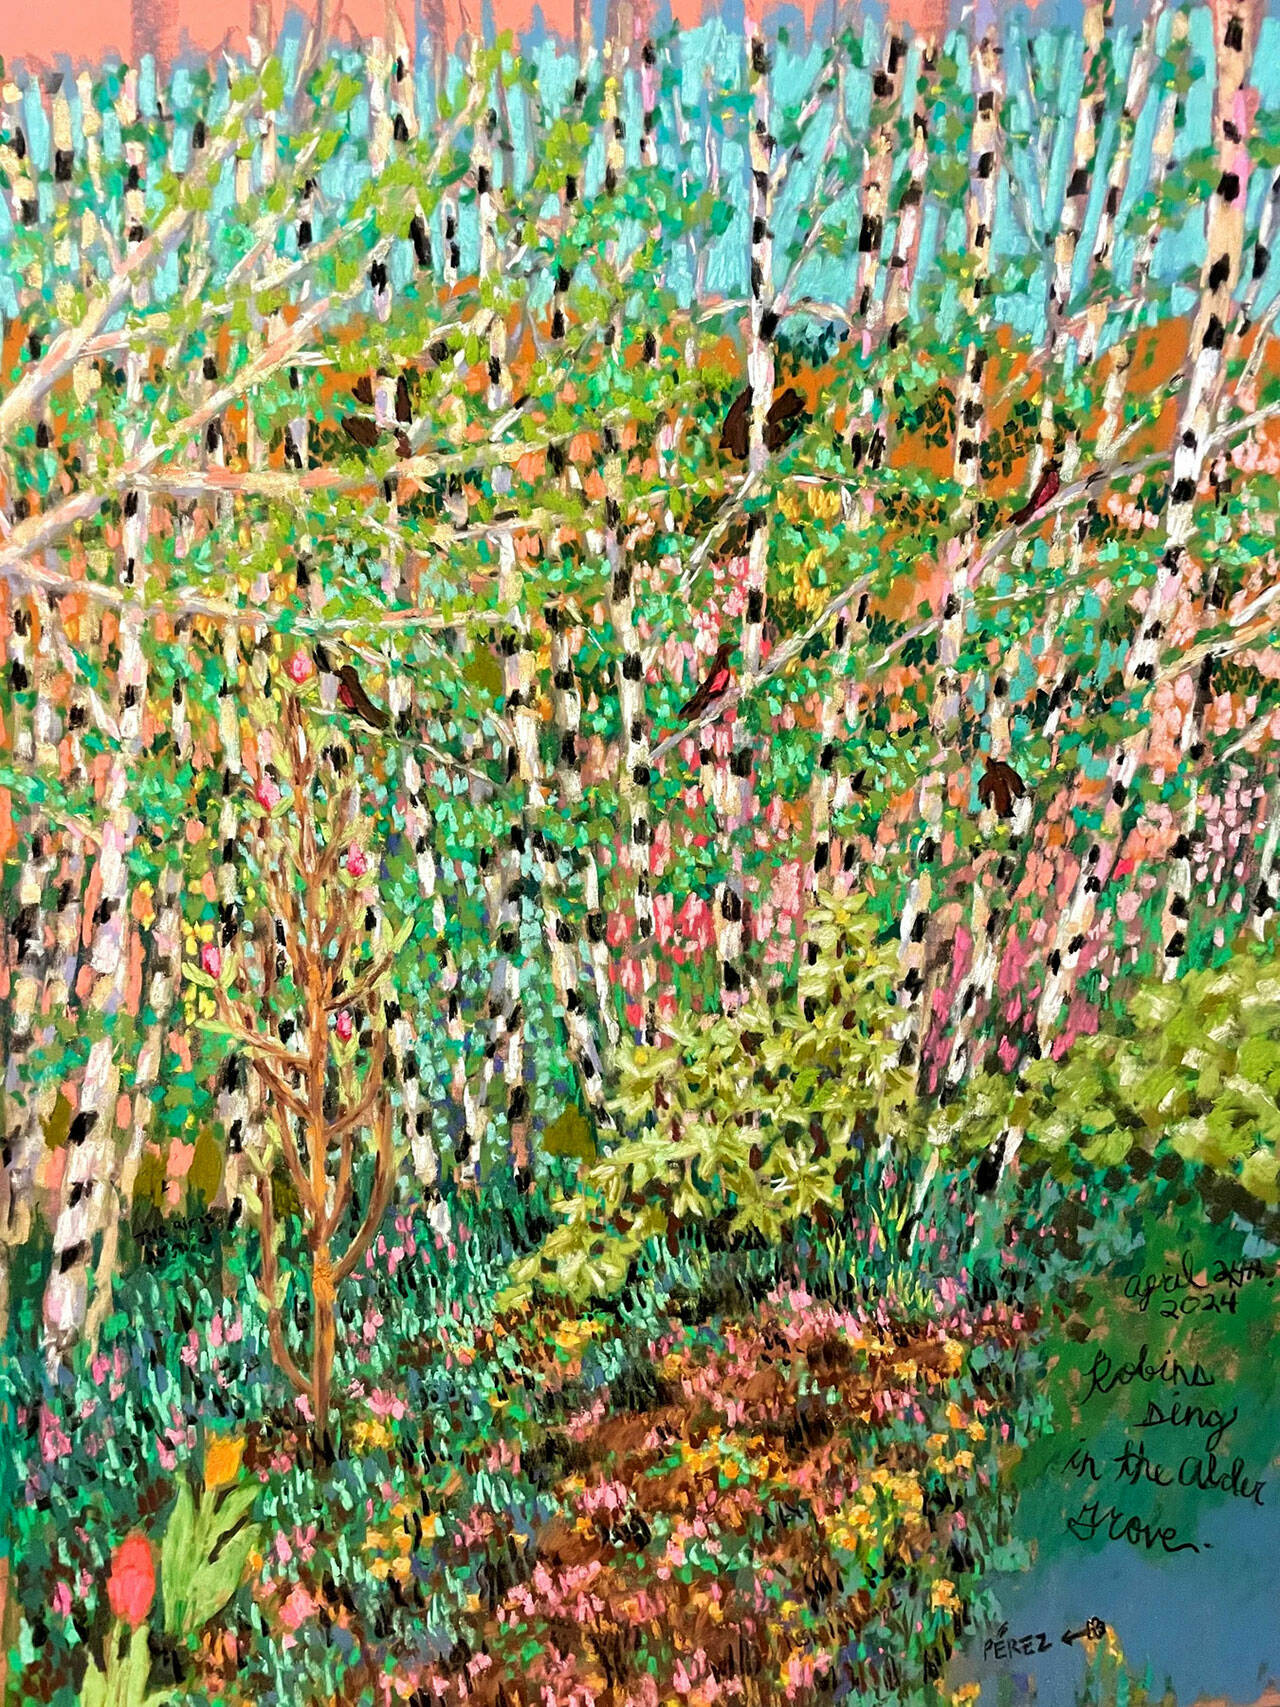 Isabel Elena Pérez’s pastel “Robins in the Alder Grove” is part of the “Lush Language” exhibit at Northwind Art’s Jeanette Best Gallery in Port Townsend.